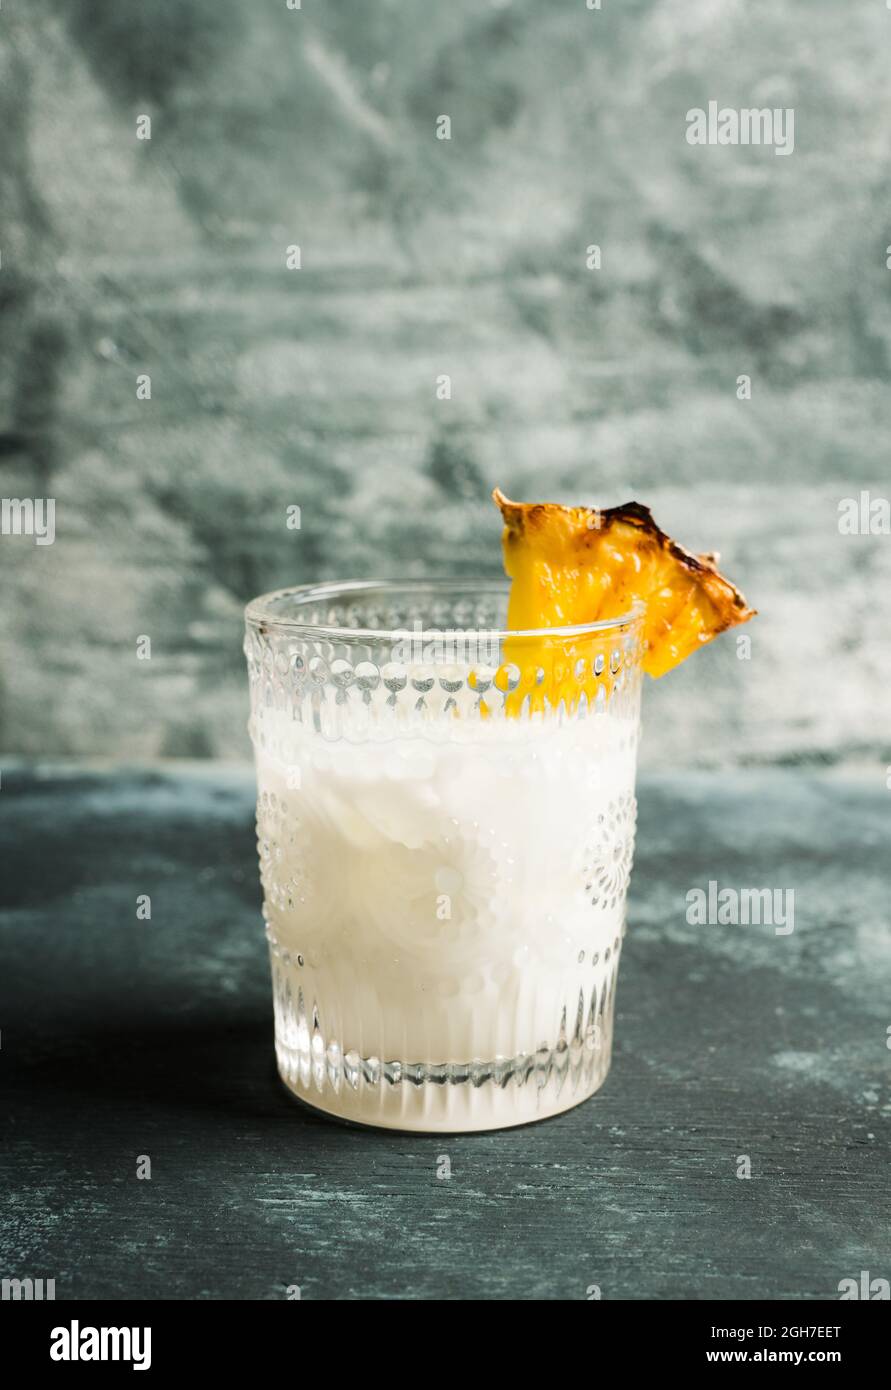 Pina colada cocktail on rustic background. Selective focus. Shallow depth of field. Stock Photo